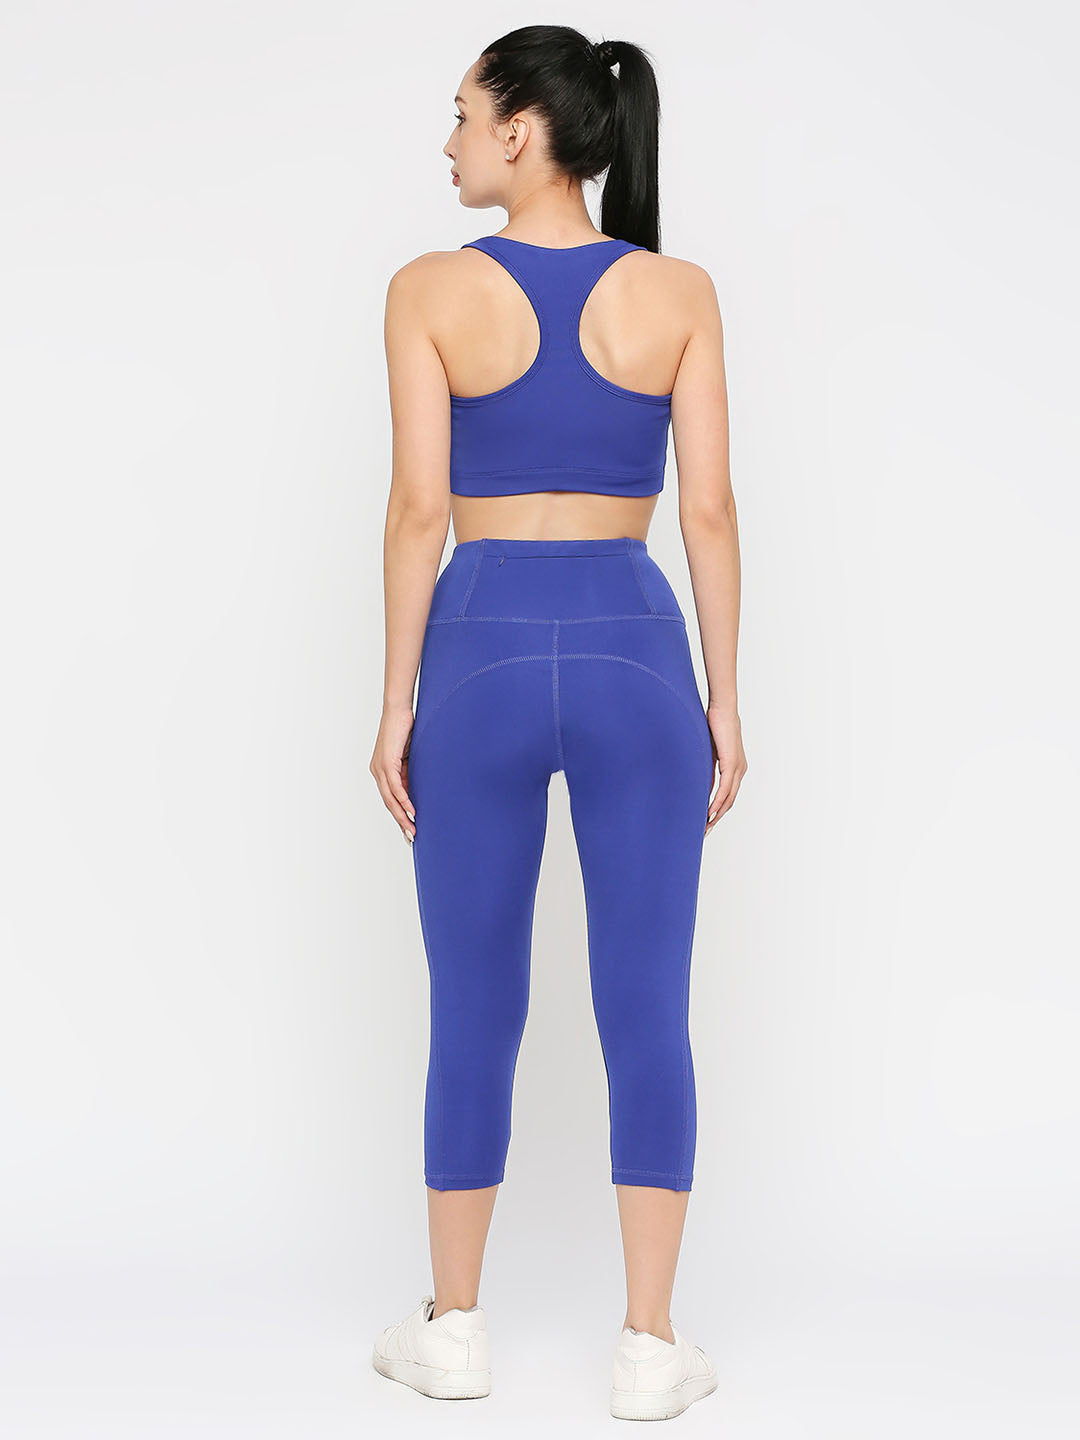 Women's Royal Blue Calf-Length Sports Leggings - Stay Comfortable and  Stylish